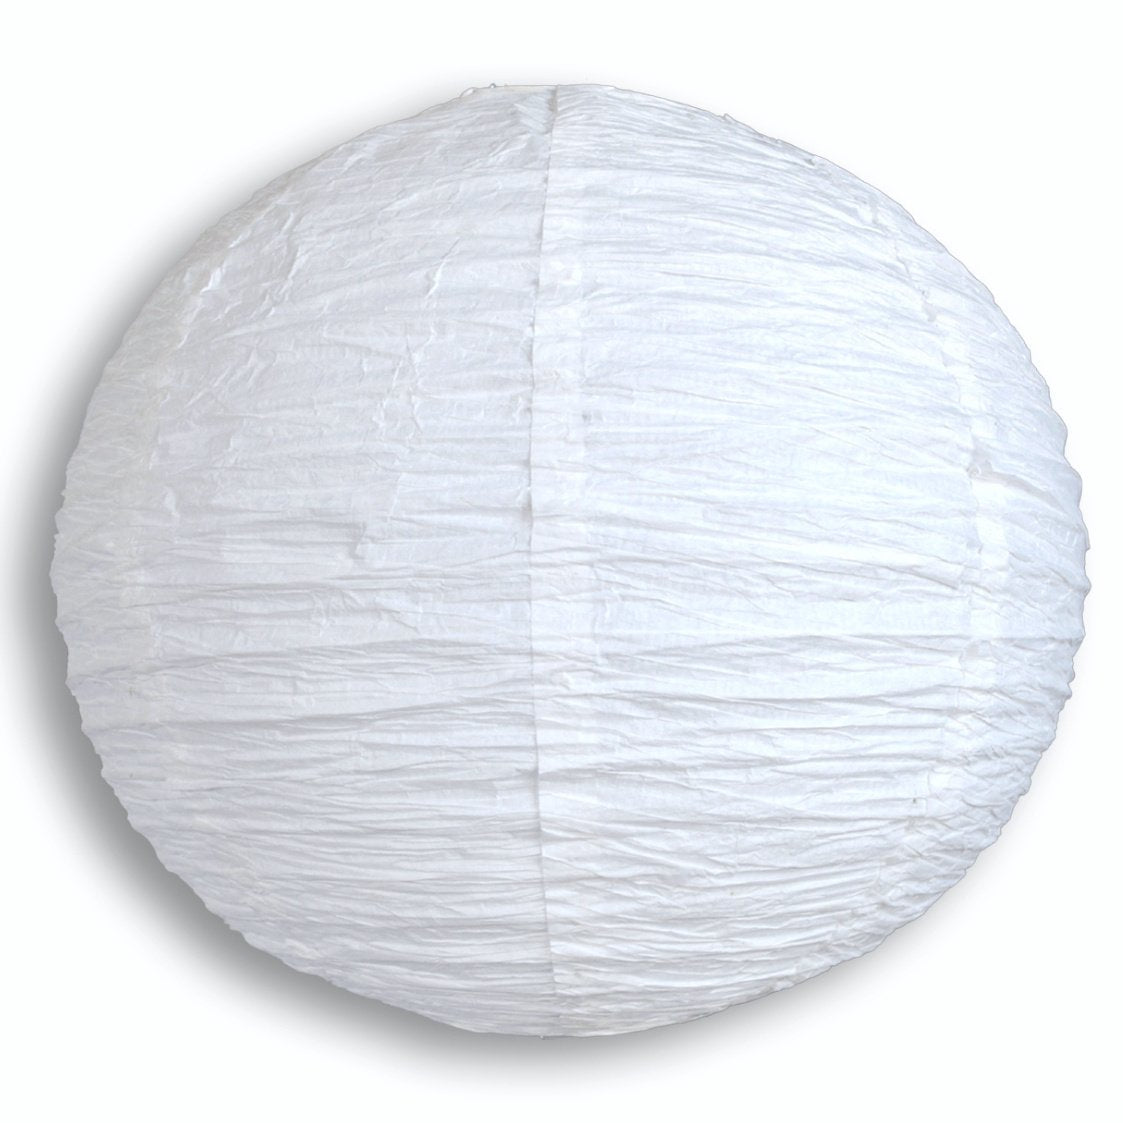 China White Party Decorations, White Party Decorations Wholesale